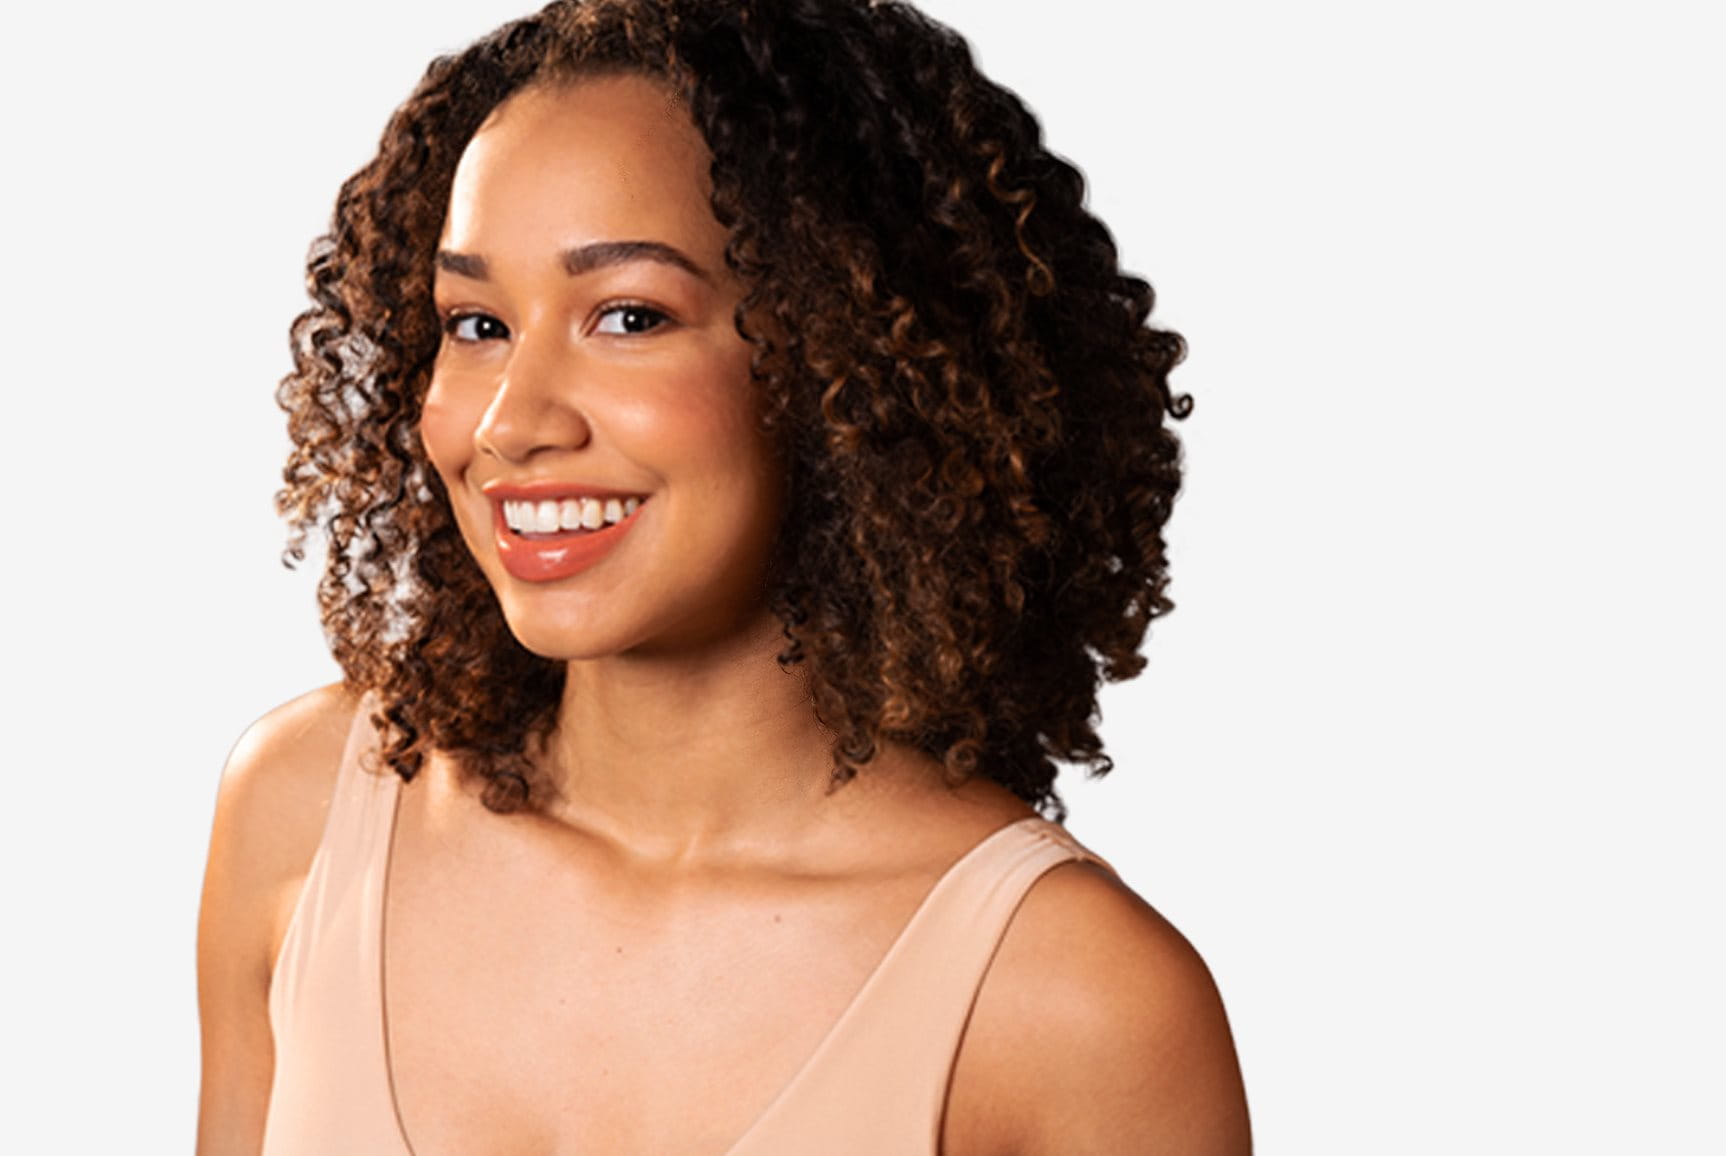 View of a person with brown curly hair smiling against a white background.